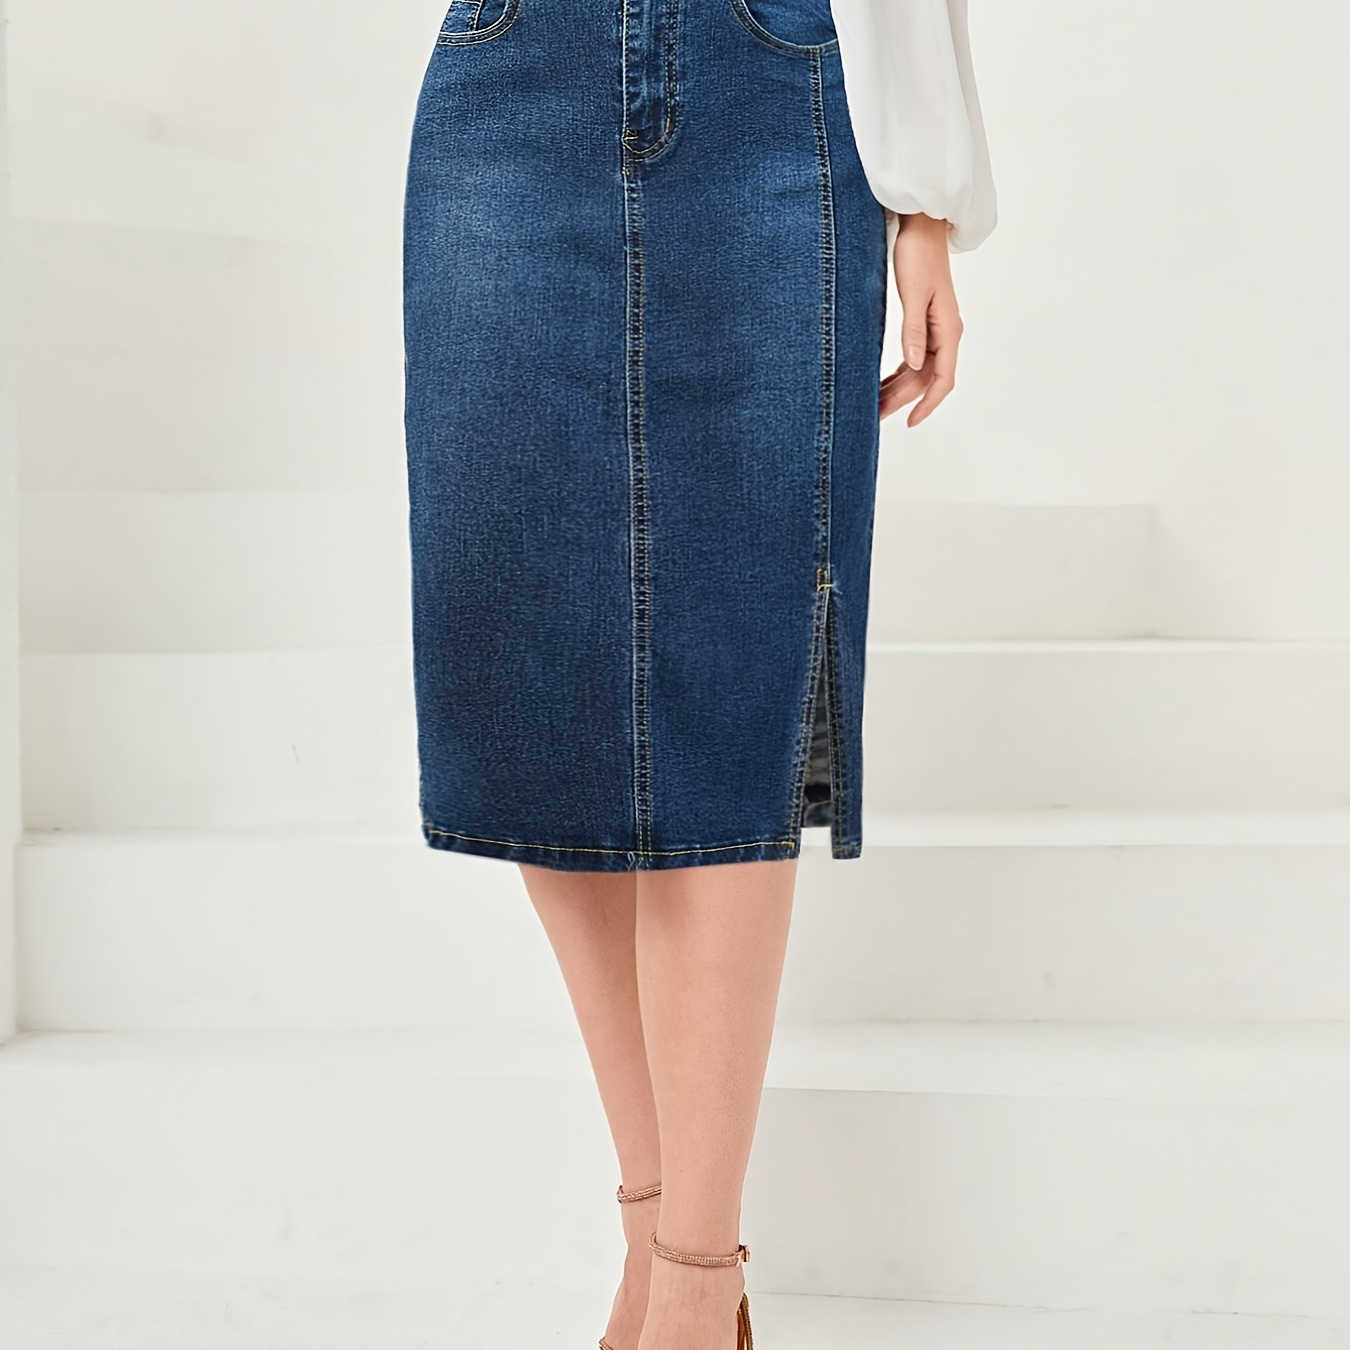 

Women's Fashion High-waisted Denim Pencil Skirt, Casual Slim Fit Midi Length With Slit, Versatile And Comfortable Style For Everyday Wear